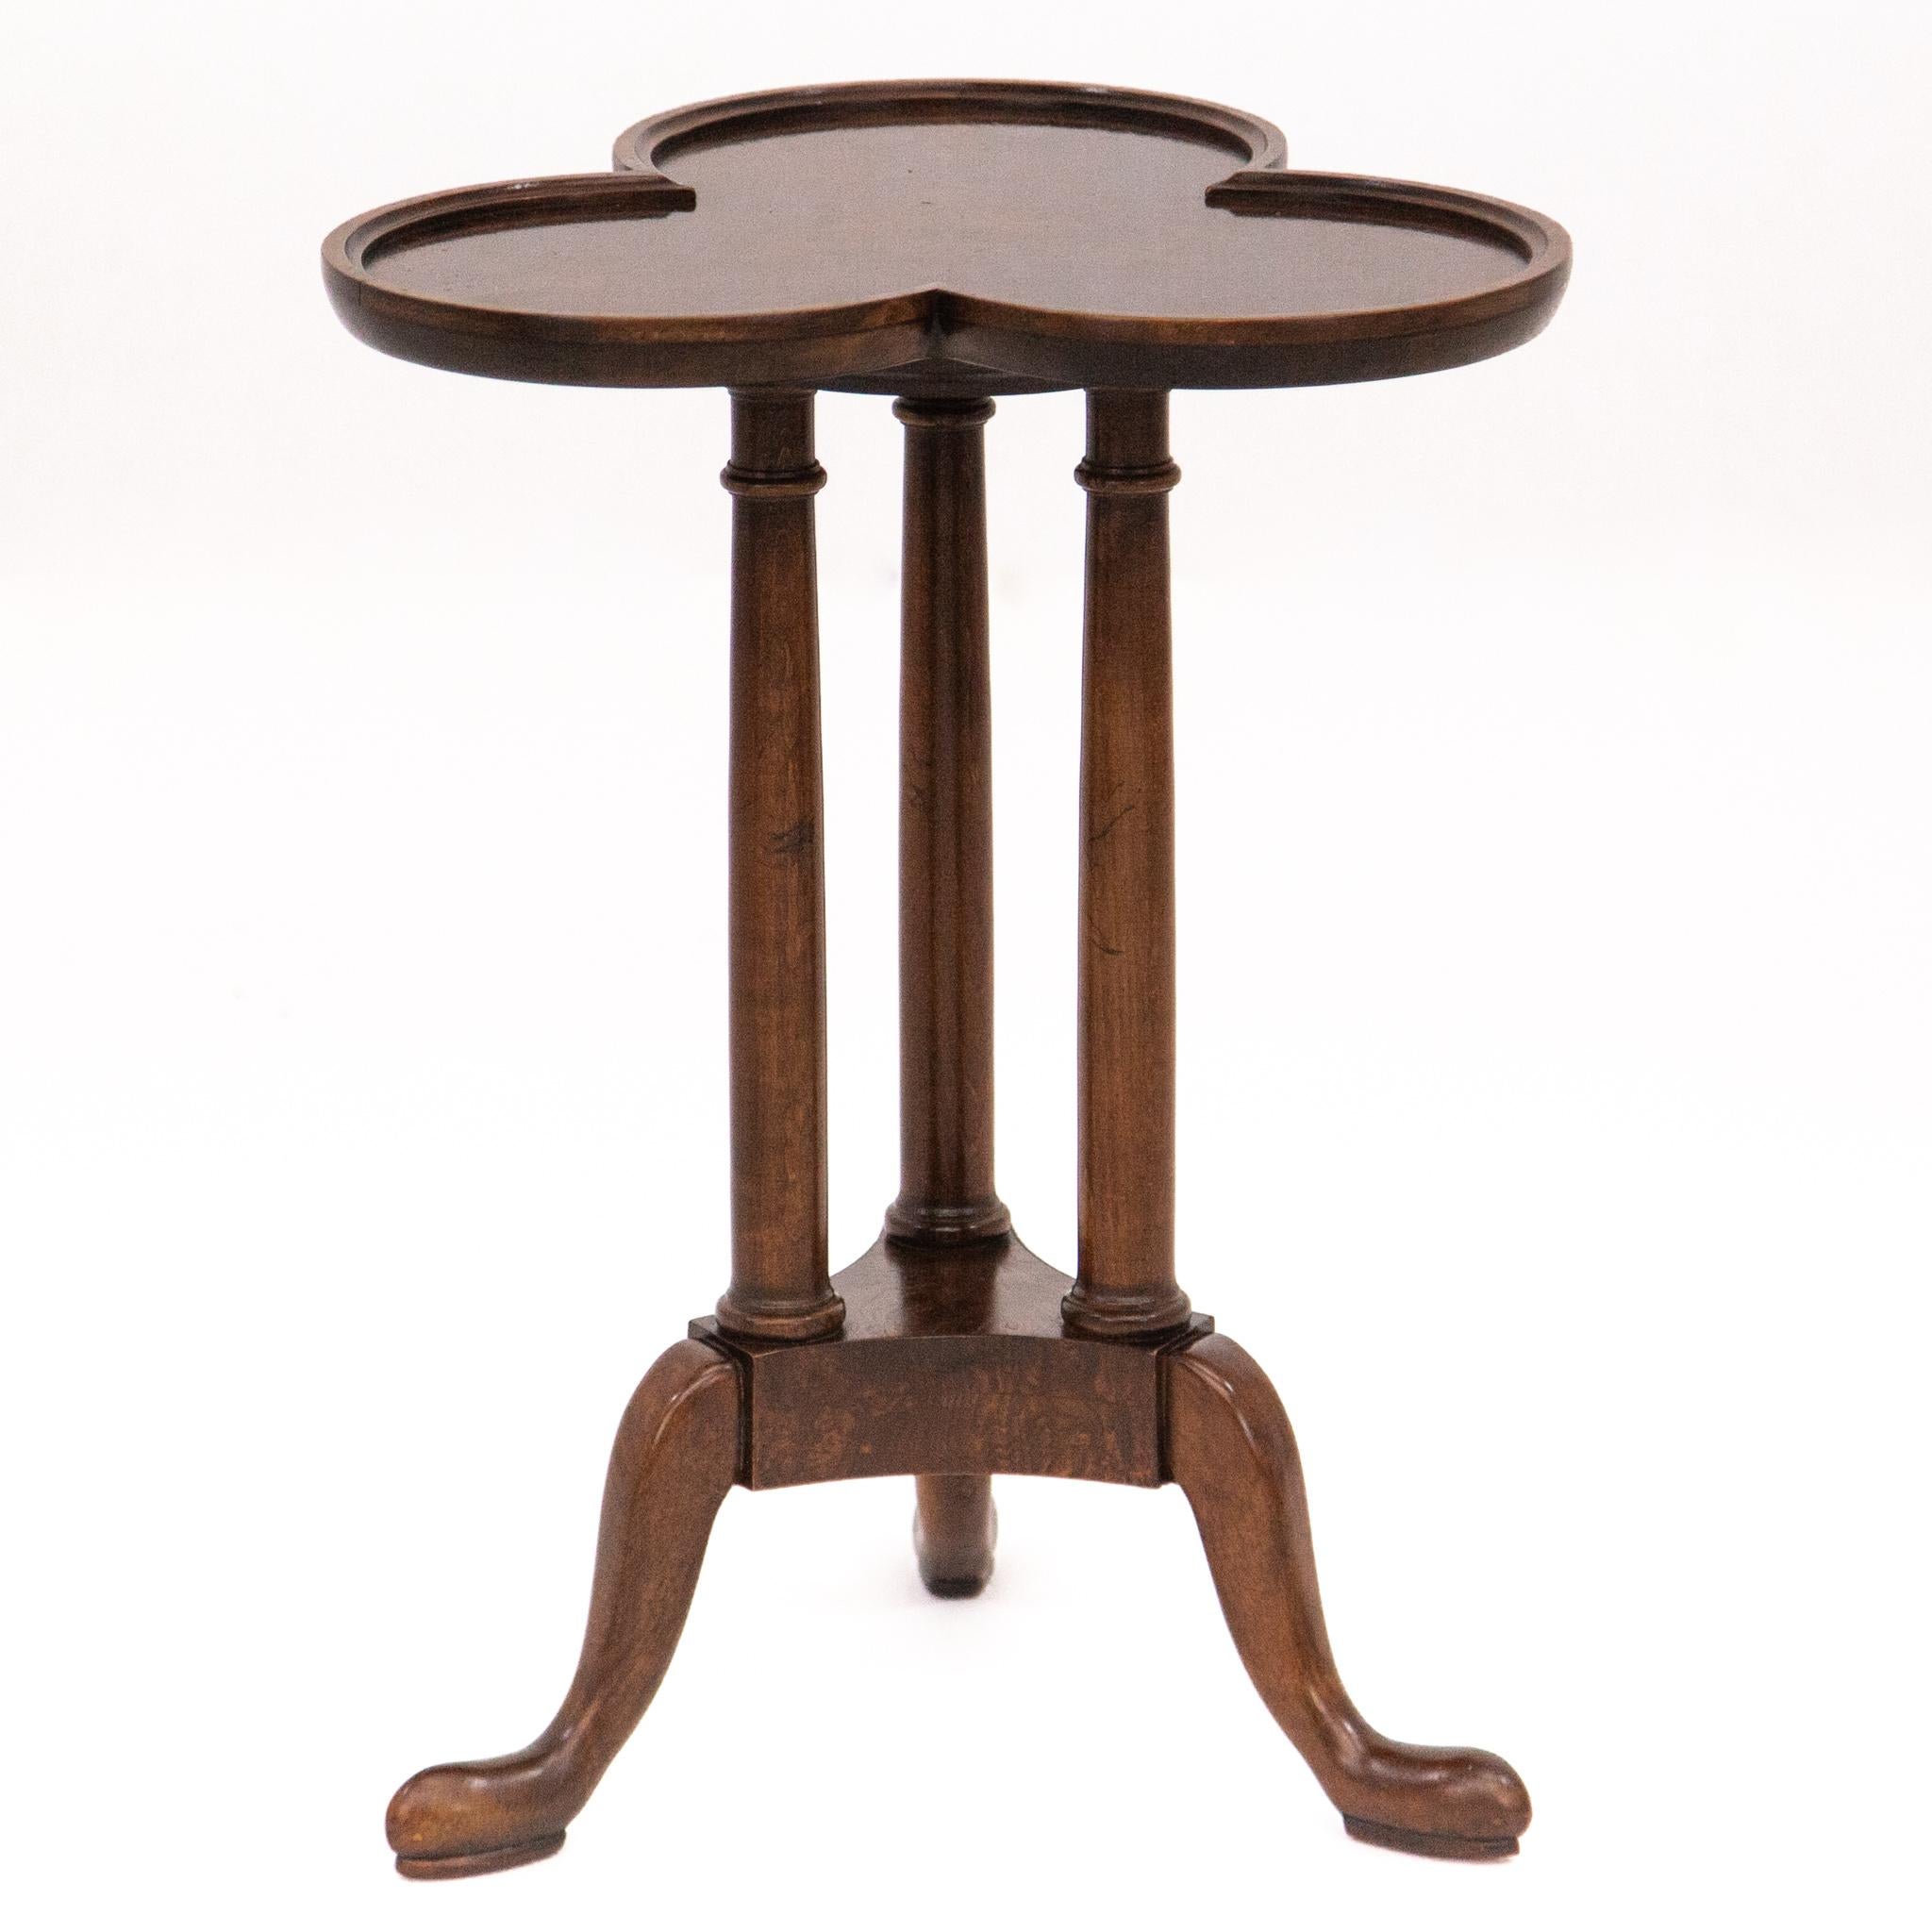 Beautifully detailed Queen Anne style walnut drinks table, accent table or candle stand with three-lobed burl top above a tripod pedestal base. Made by Baker Furniture, circa 1960s. It is in excellent vintage condition with very minimal age wear.